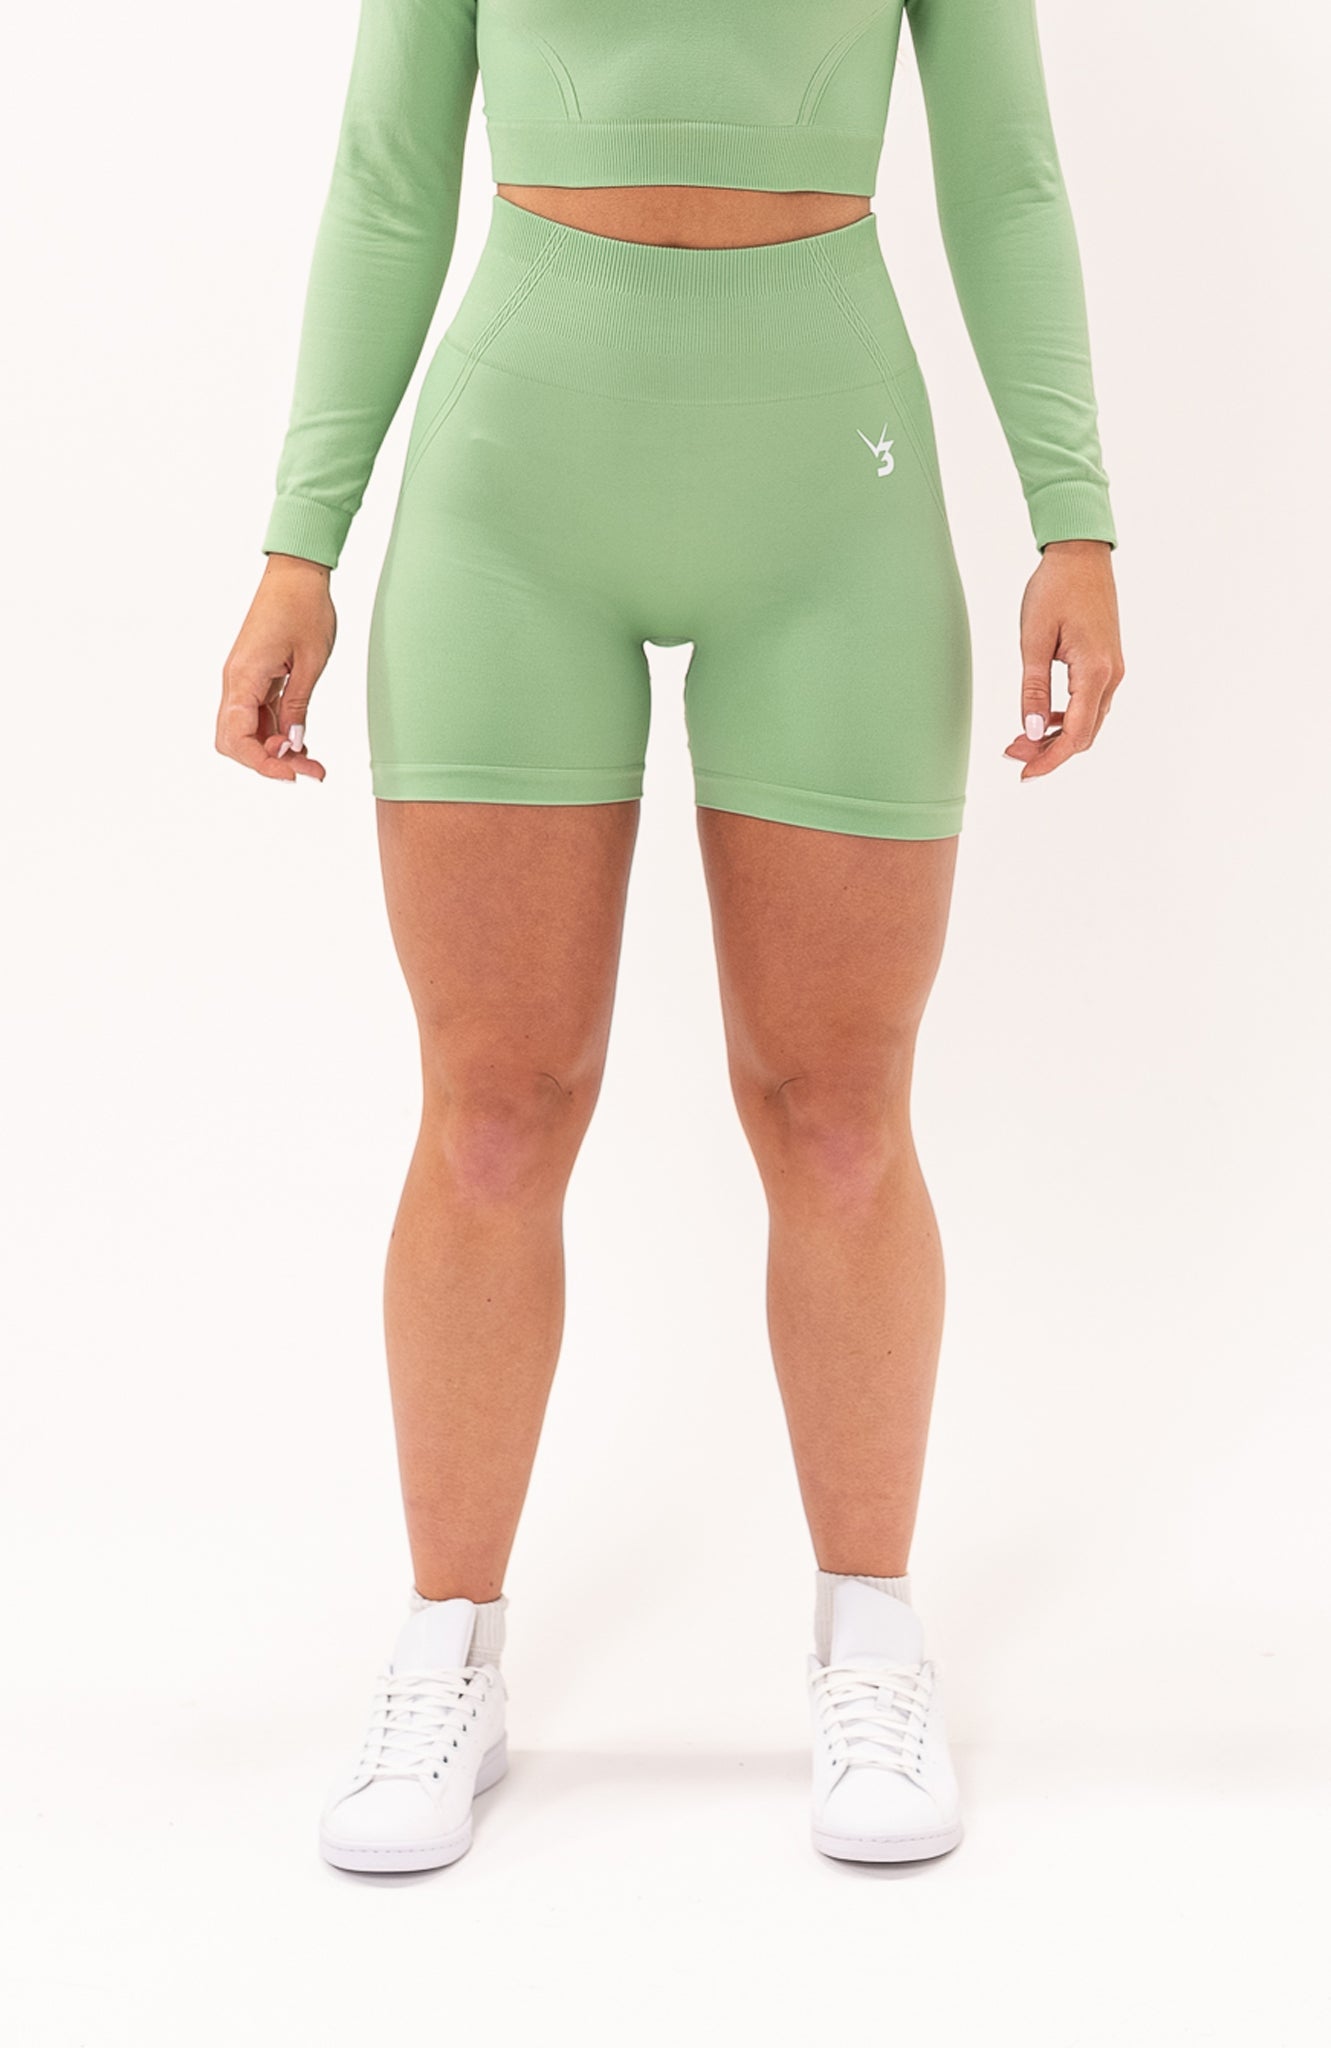 redbaysand Women's Tempo seamless scrunch bum shaping high waisted cycle shorts in mint green – Squat proof 5 inch leg gym shorts for workouts training, Running, yoga, bodybuilding and bikini fitness.